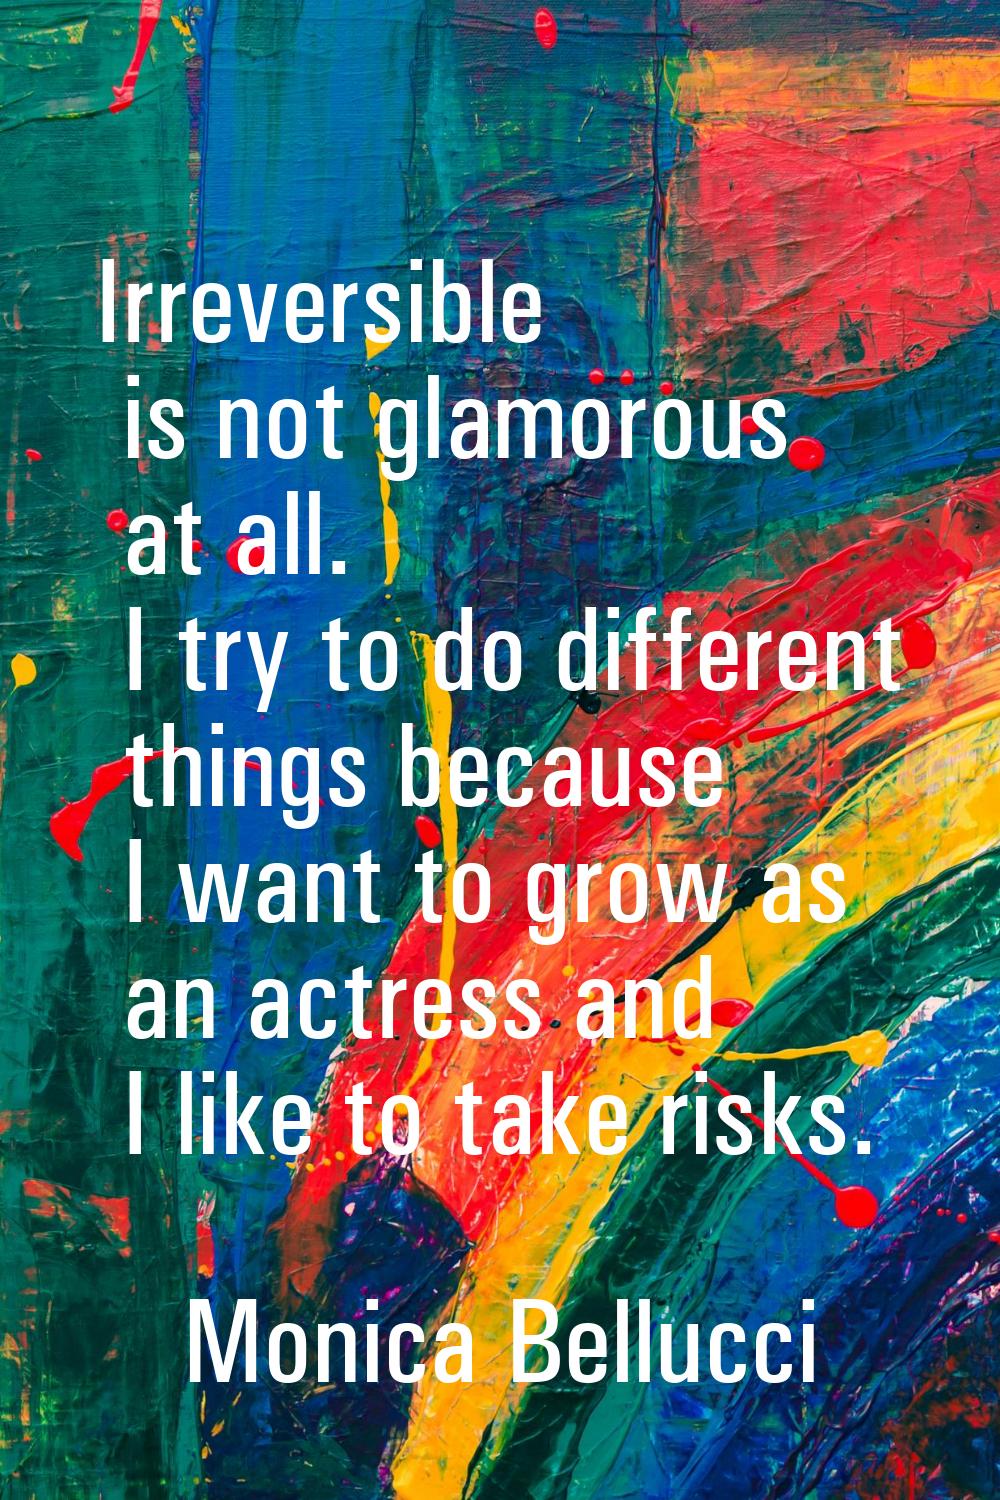 Irreversible is not glamorous at all. I try to do different things because I want to grow as an act